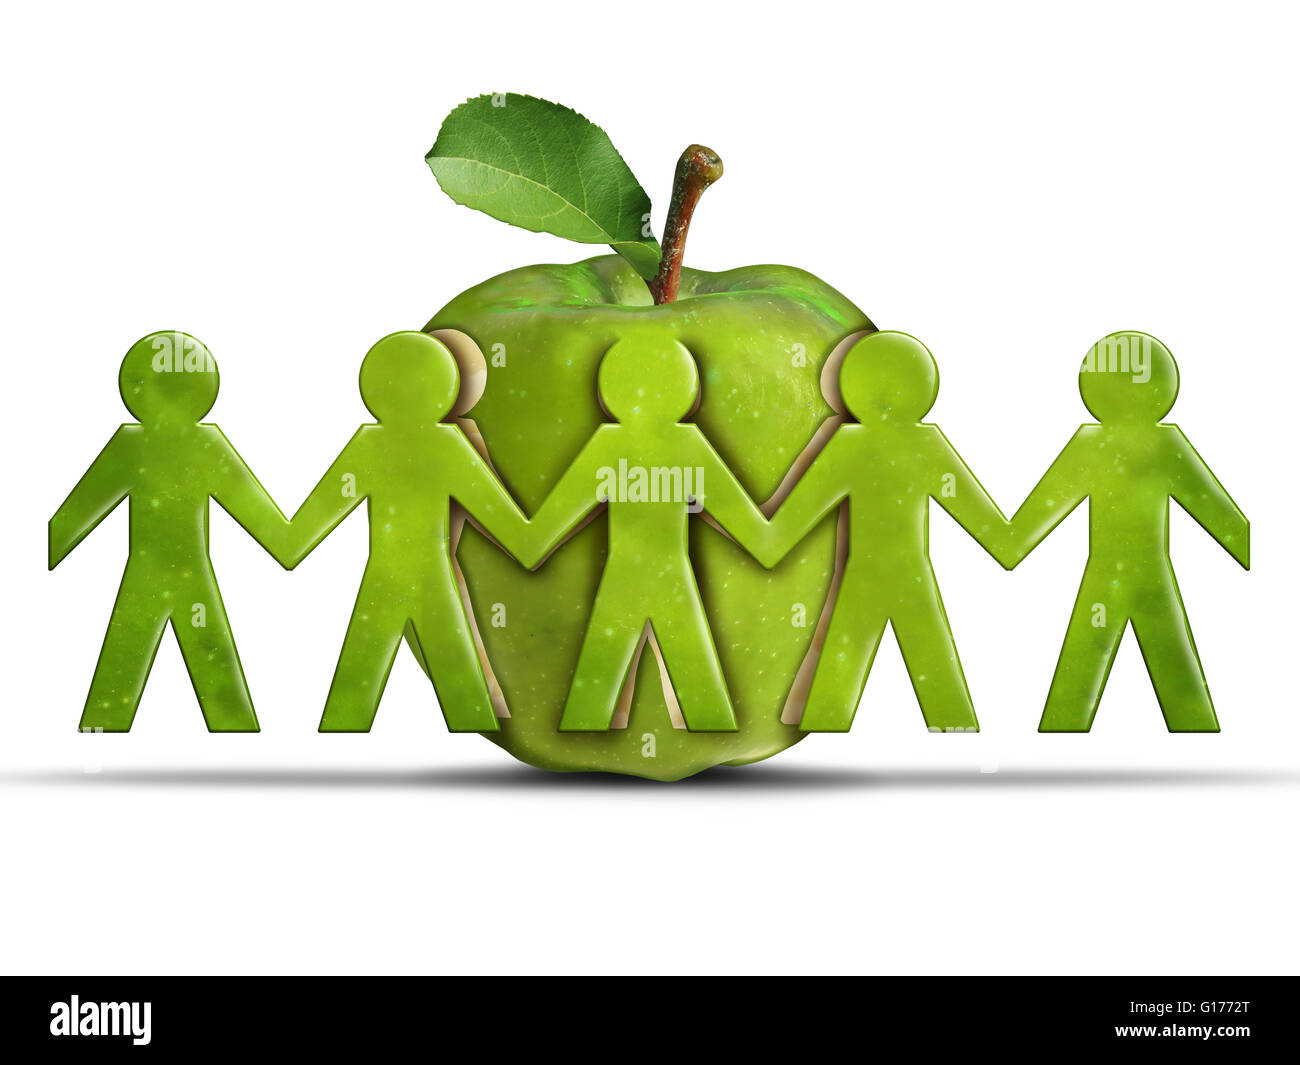 Group health and community health care or healthcare concept as a green apple with cut out peeled fruit skin shaped as humans ho Stock Photo